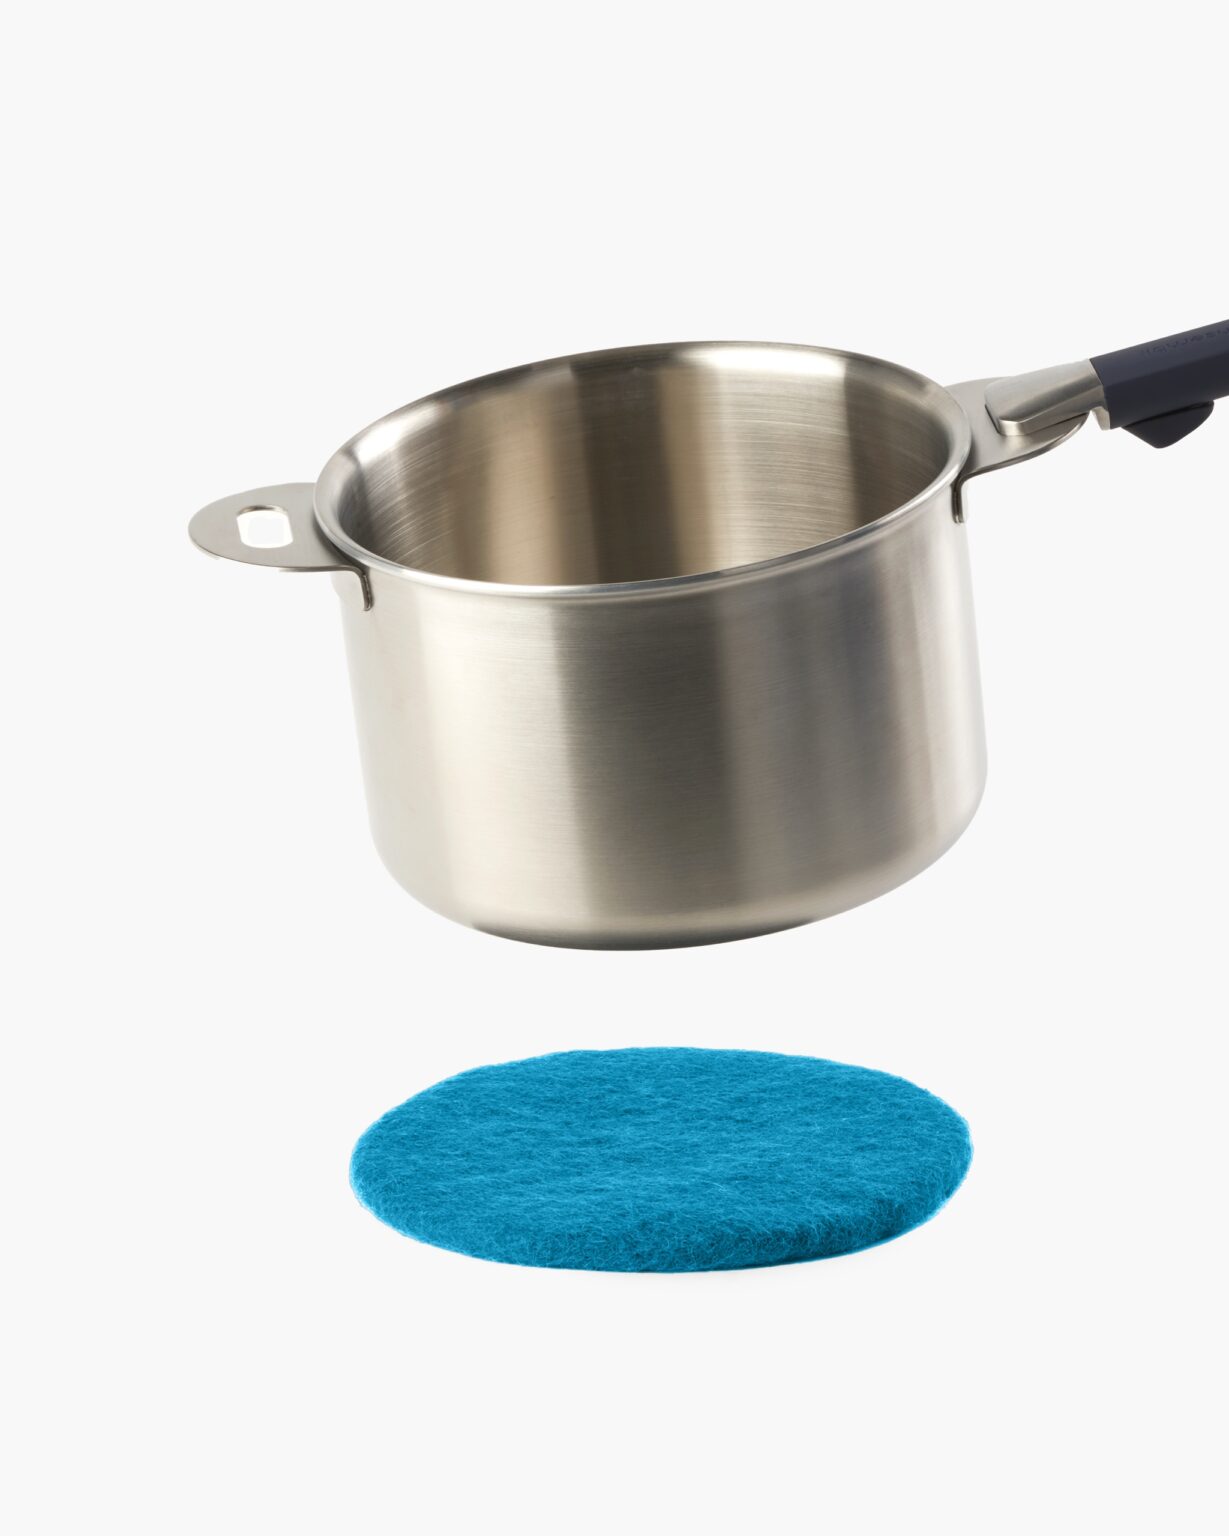 Shop ENSEMBL Ecological Wool Trivet for Stainless Steel Fully Clad Cookware. Multifunctional, long-lasting, design-forward home wares. Protect your table from heat while you serve. Best Wool Trivet. 100% Wool. Bloomsbury Blue Wool Trivet.